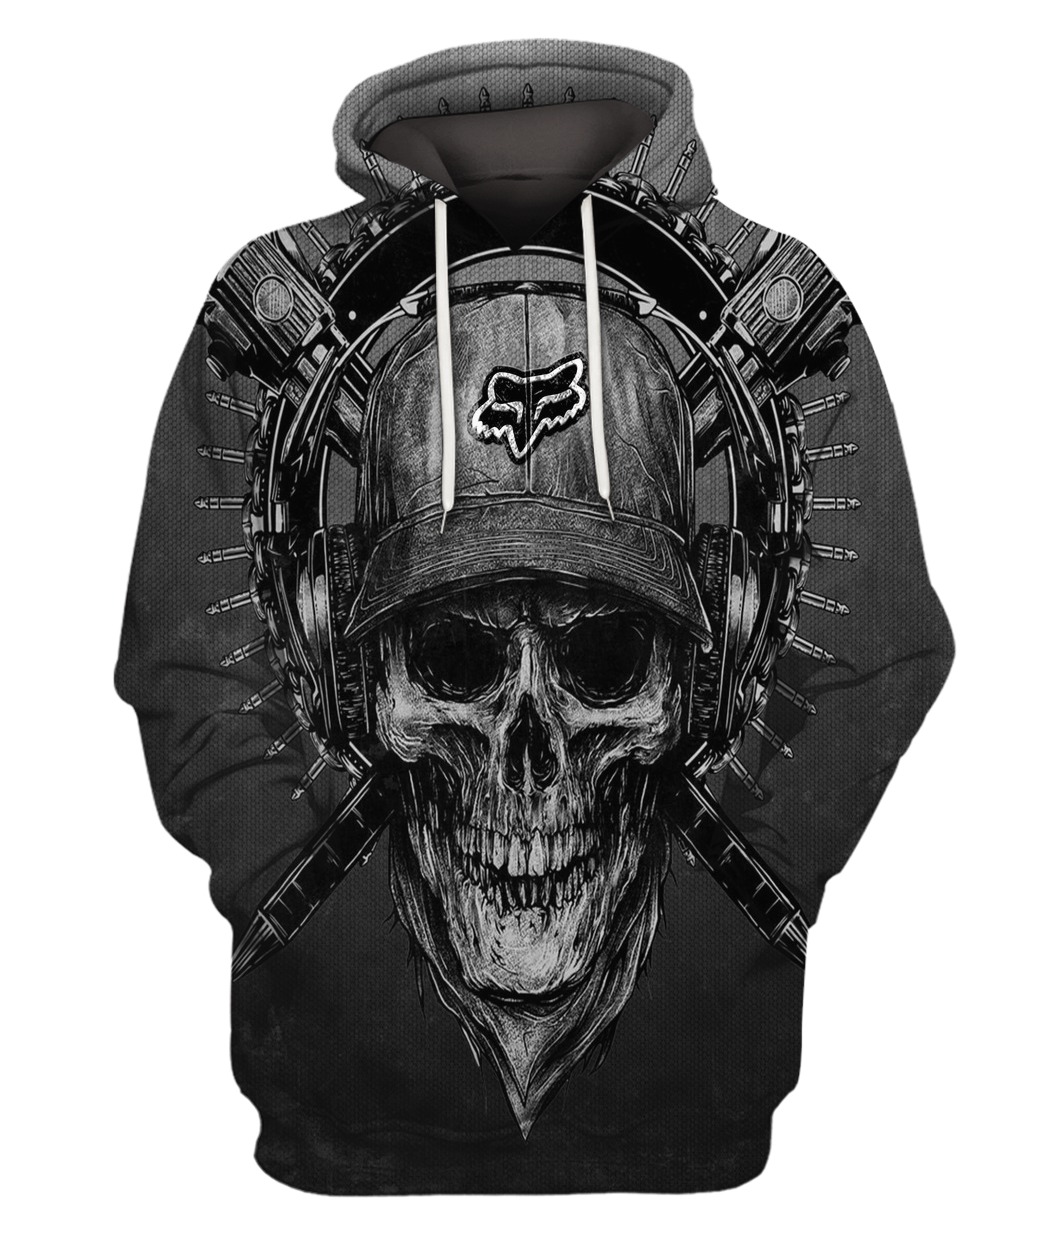 Terror noise division fox racing all over print hoodie 1